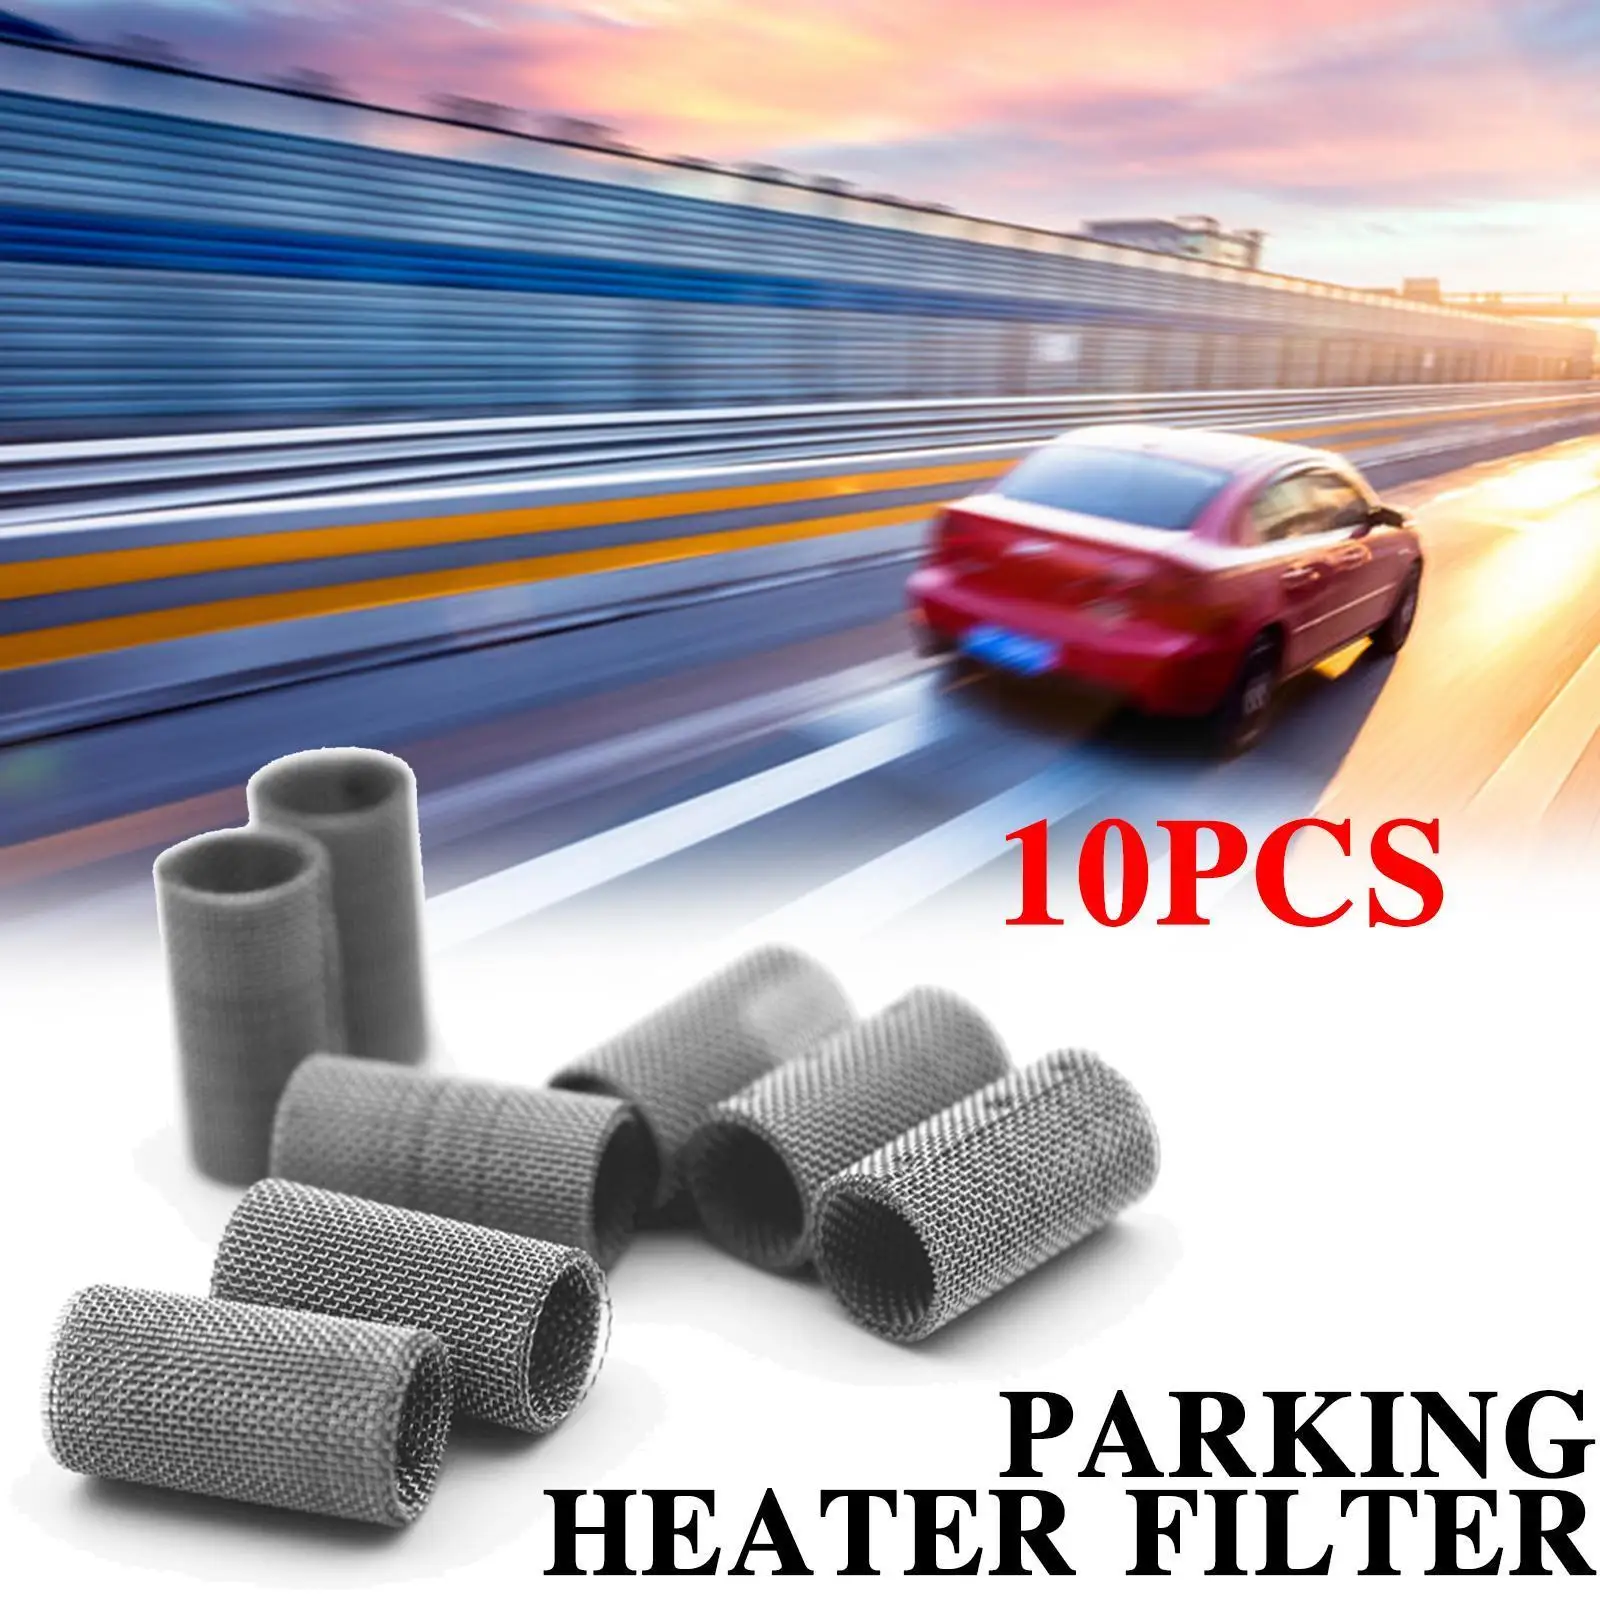 

10Pcs 310s Stainless Steel Filter Mesh Strainer Screen For Diesel Air Parking Heater Car Glow Plug Burner 3-Layers Filter M B3M5